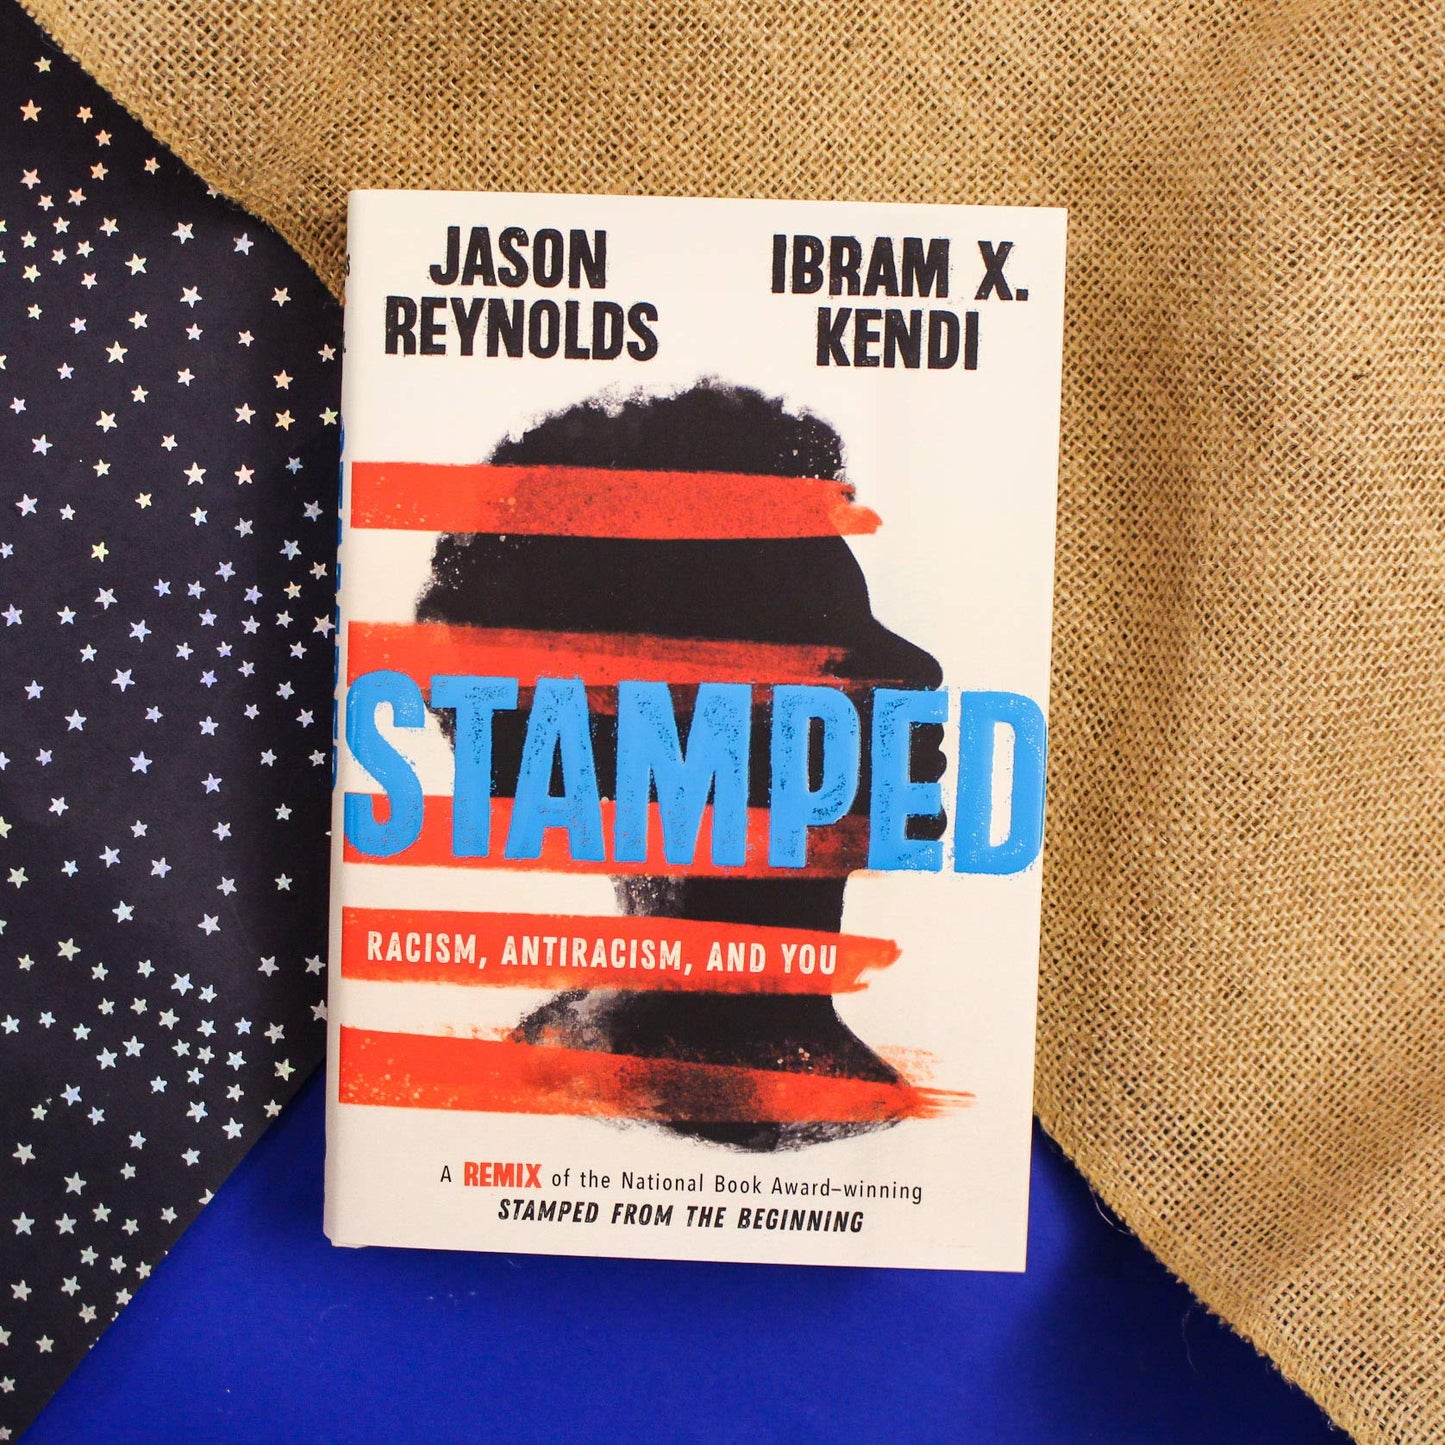 Stamped: Racism, Antiracism, and You by Jason Reynolds and Ibram X. Kendi - Banned Books Collection